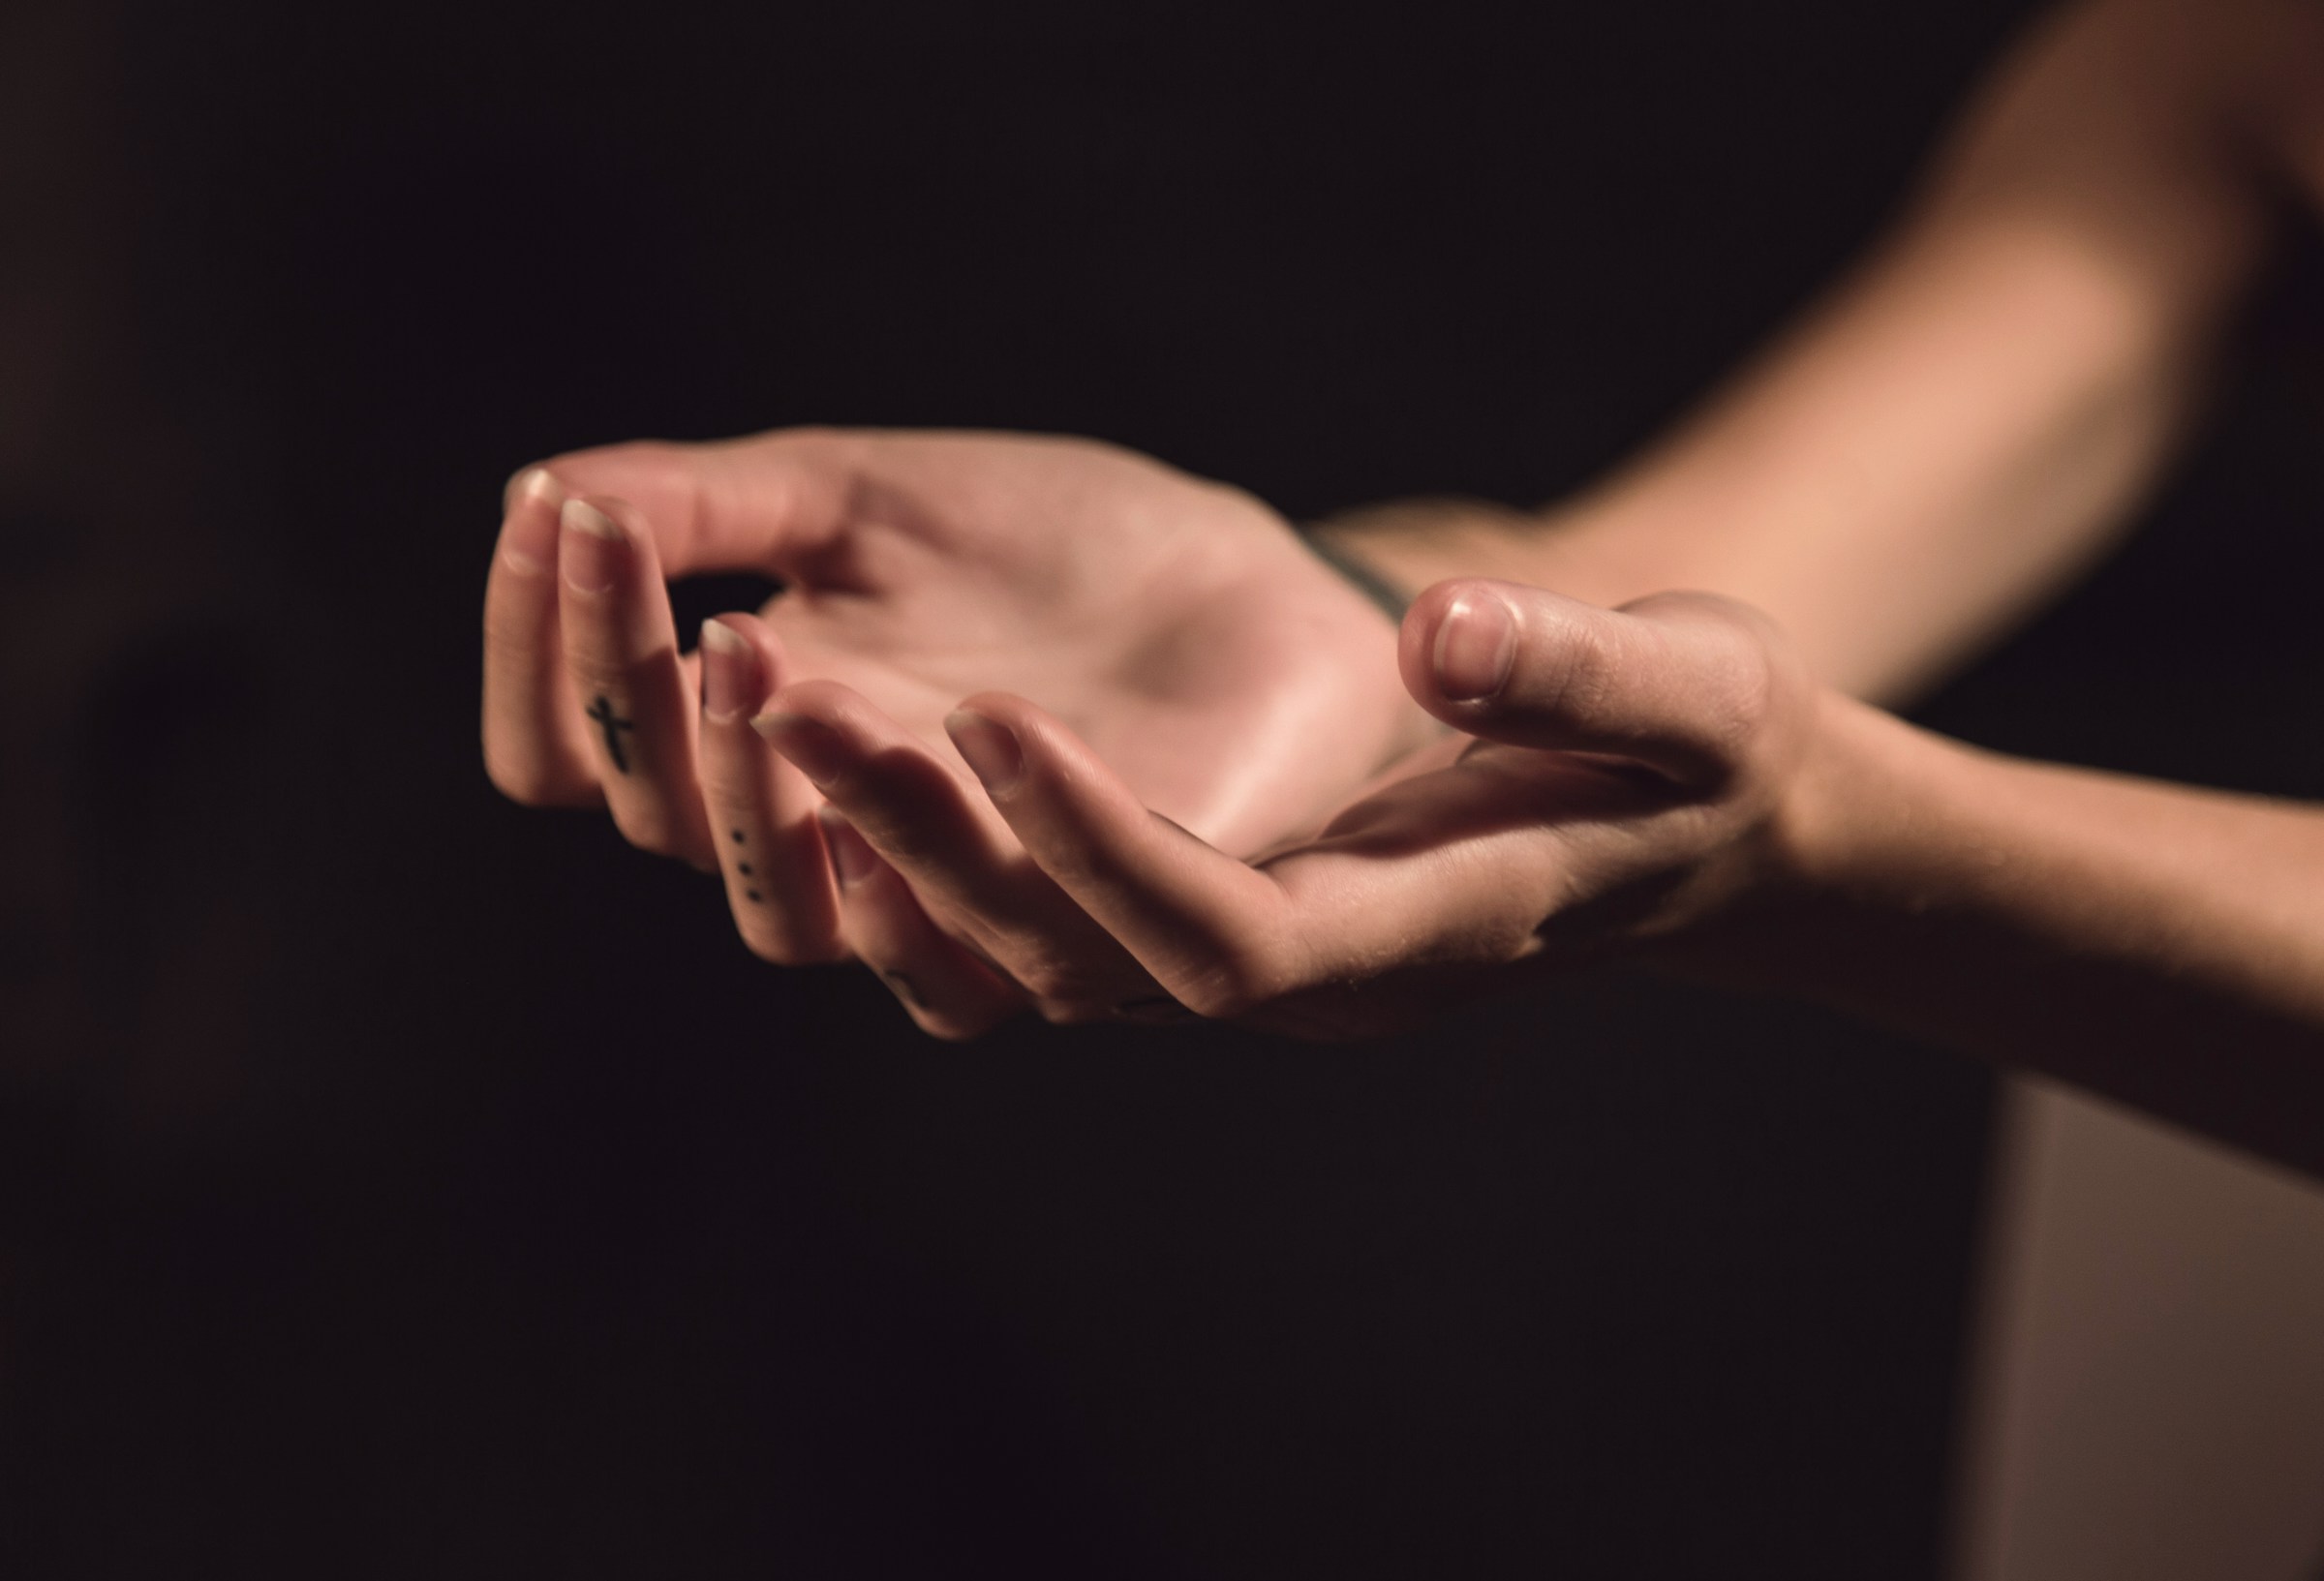 A woman with her hands outstretched | Source: Unsplash